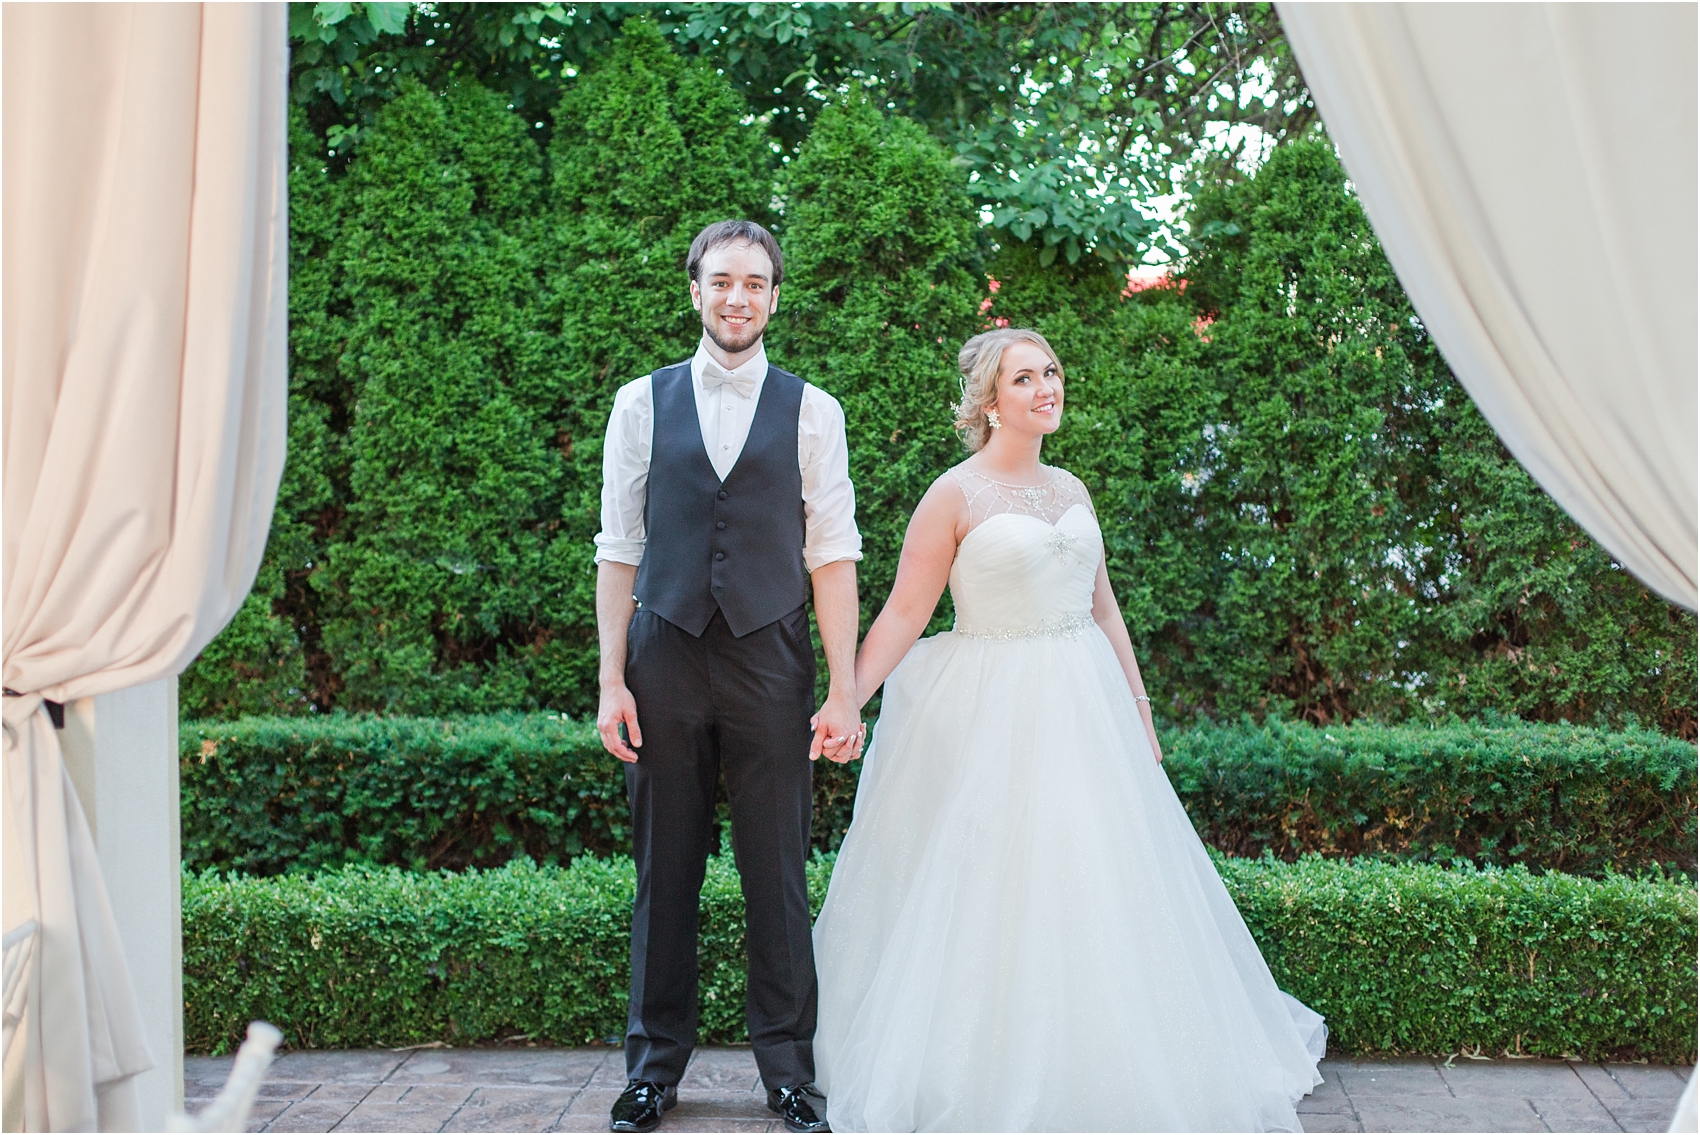 lord-of-the-rings-inspired-wedding-photos-at-crystal-gardens-in-howell-mi-by-courtney-carolyn-photography_0096.jpg